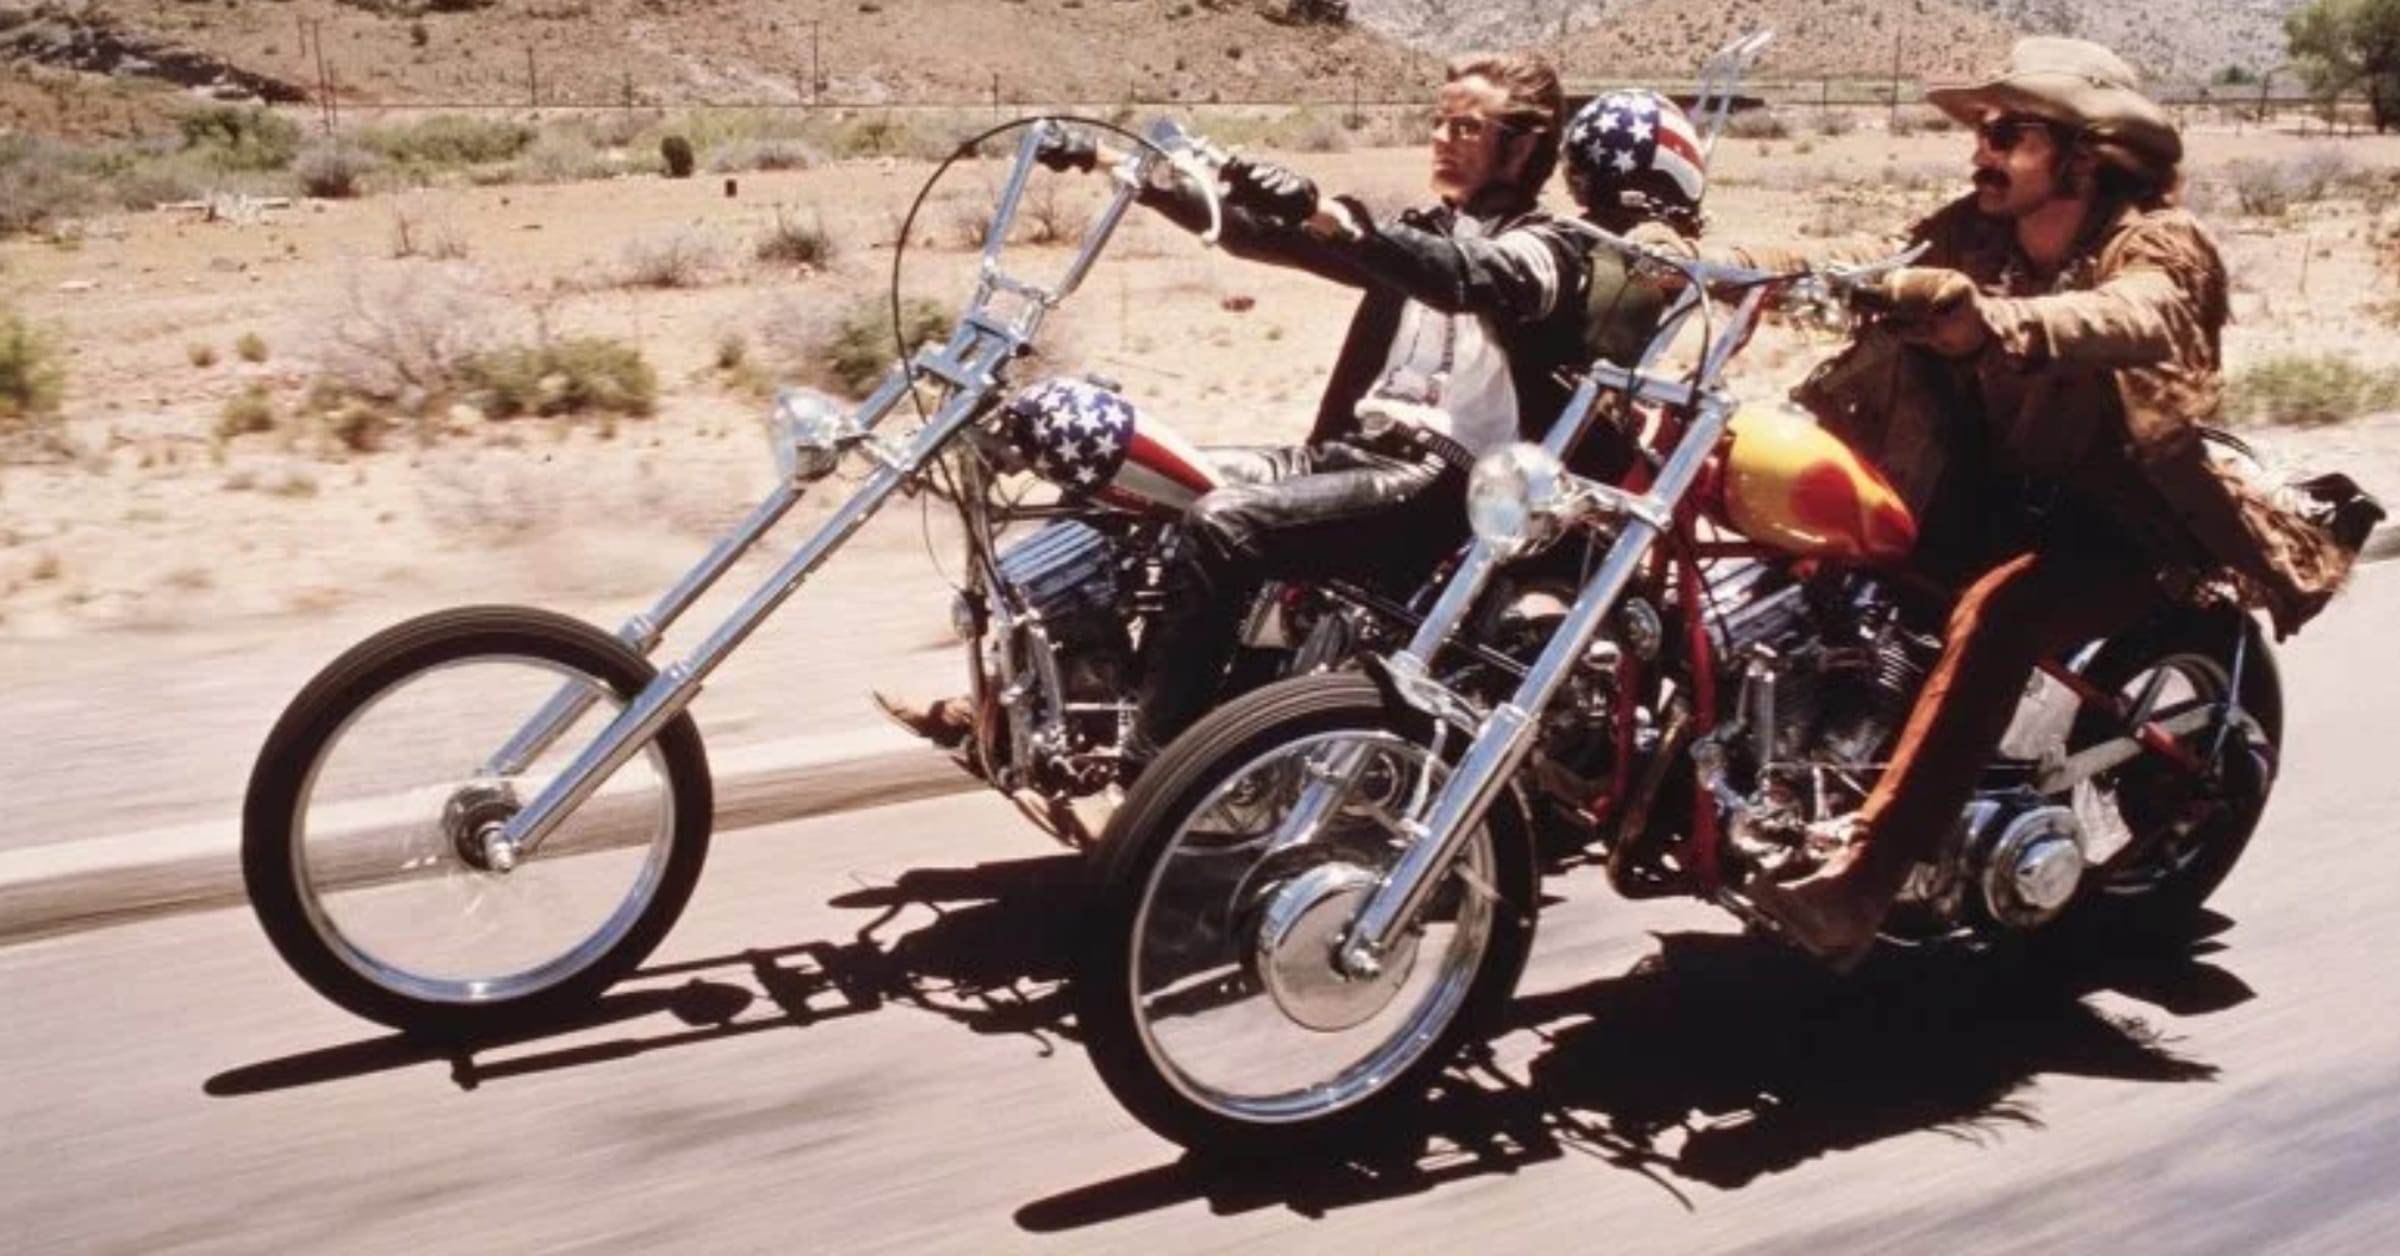 Easy Rider' Behind The Scenes Stories As Wild As The Film Itself